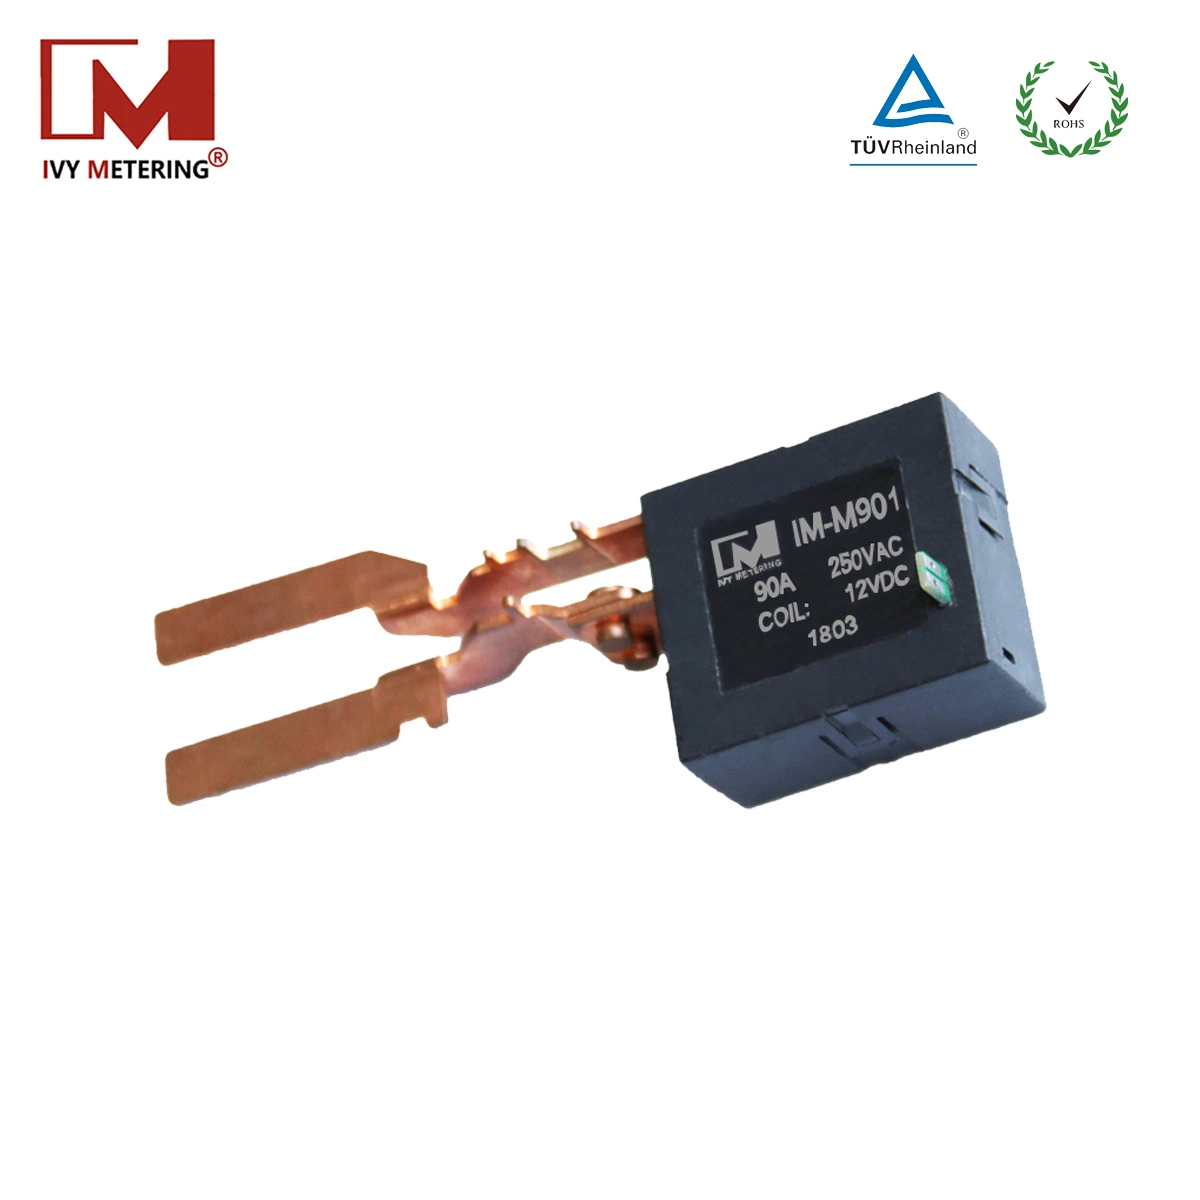 UC3 Certified Power Latching Motor Relay Switch for Electric Vehicle